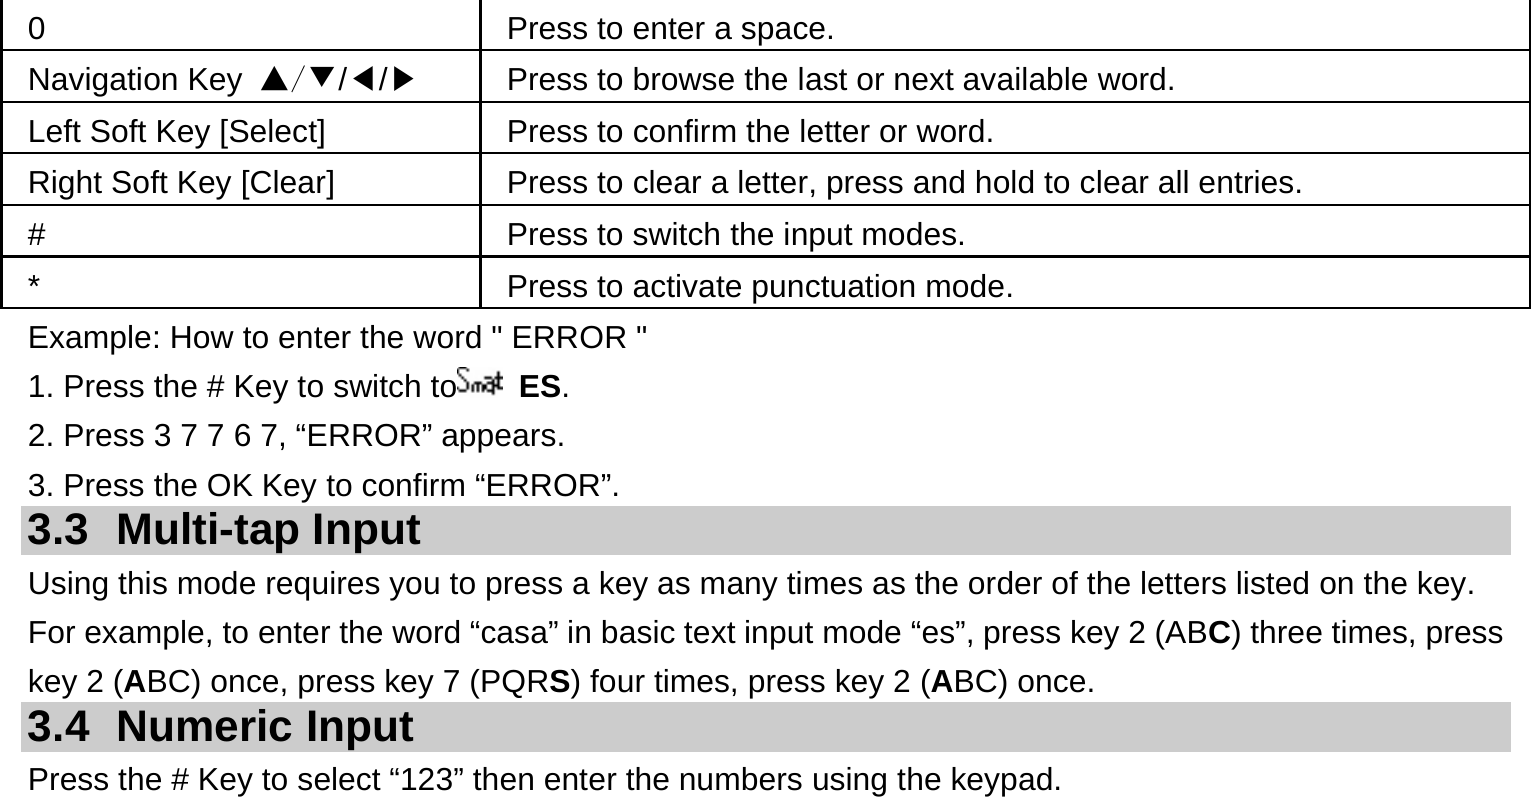  0  Press to enter a space. Navigation Key ▲/▼/◀/▶  Press to browse the last or next available word. Left Soft Key [Select]  Press to confirm the letter or word. Right Soft Key [Clear]  Press to clear a letter, press and hold to clear all entries. #  Press to switch the input modes. *  Press to activate punctuation mode. Example: How to enter the word &quot; ERROR &quot; 1. Press the # Key to switch to  ES. 2. Press 3 7 7 6 7, “ERROR” appears. 3. Press the OK Key to confirm “ERROR”. 3.3 Multi-tap Input Using this mode requires you to press a key as many times as the order of the letters listed on the key. For example, to enter the word “casa” in basic text input mode “es”, press key 2 (ABC) three times, press key 2 (ABC) once, press key 7 (PQRS) four times, press key 2 (ABC) once. 3.4 Numeric Input Press the # Key to select “123” then enter the numbers using the keypad.    